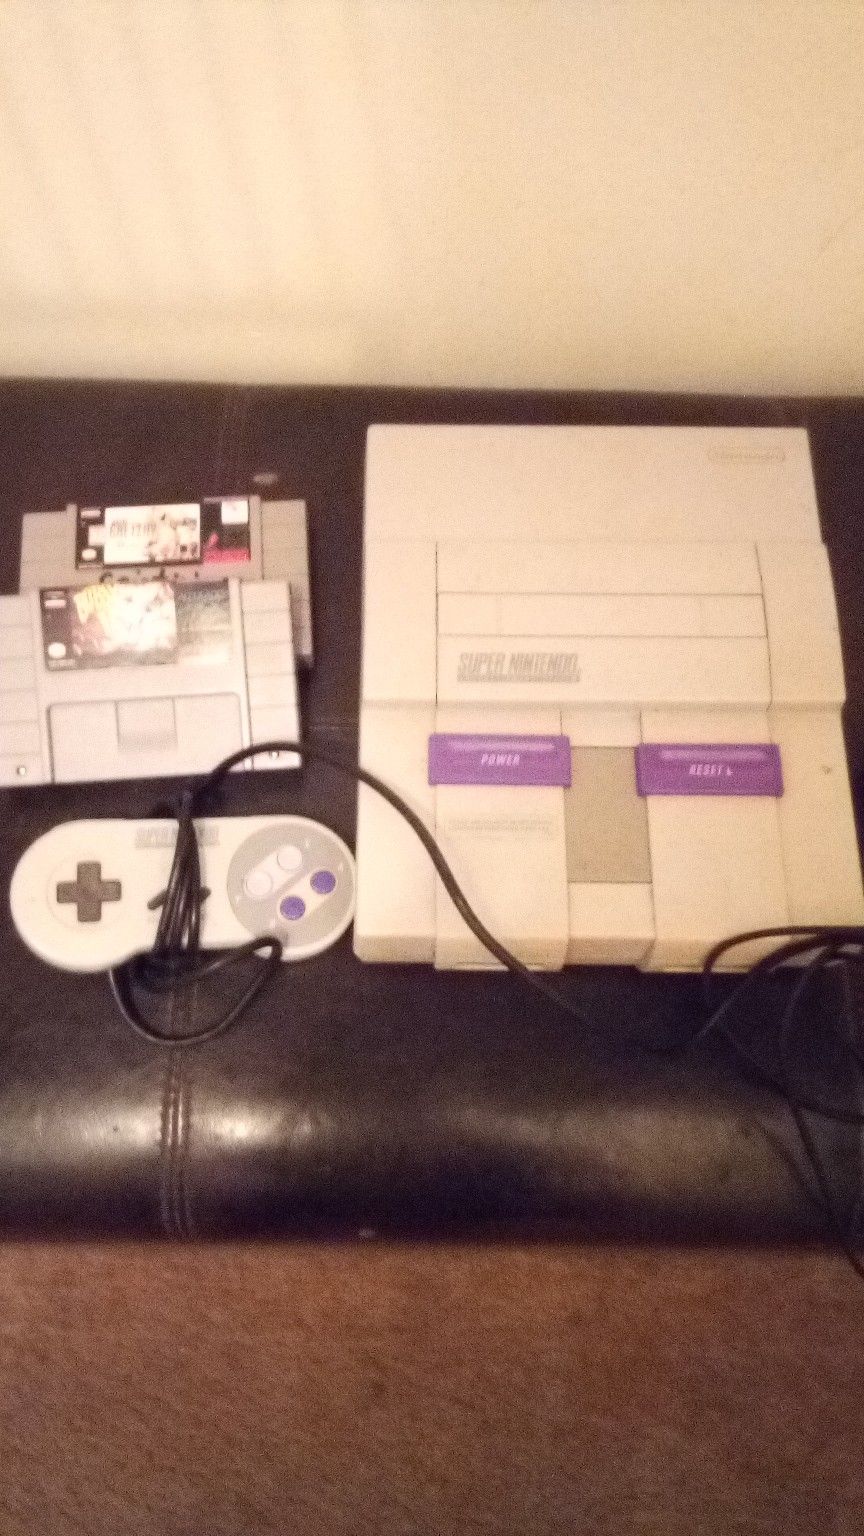 Super Nintendo classic with controller and 2 games